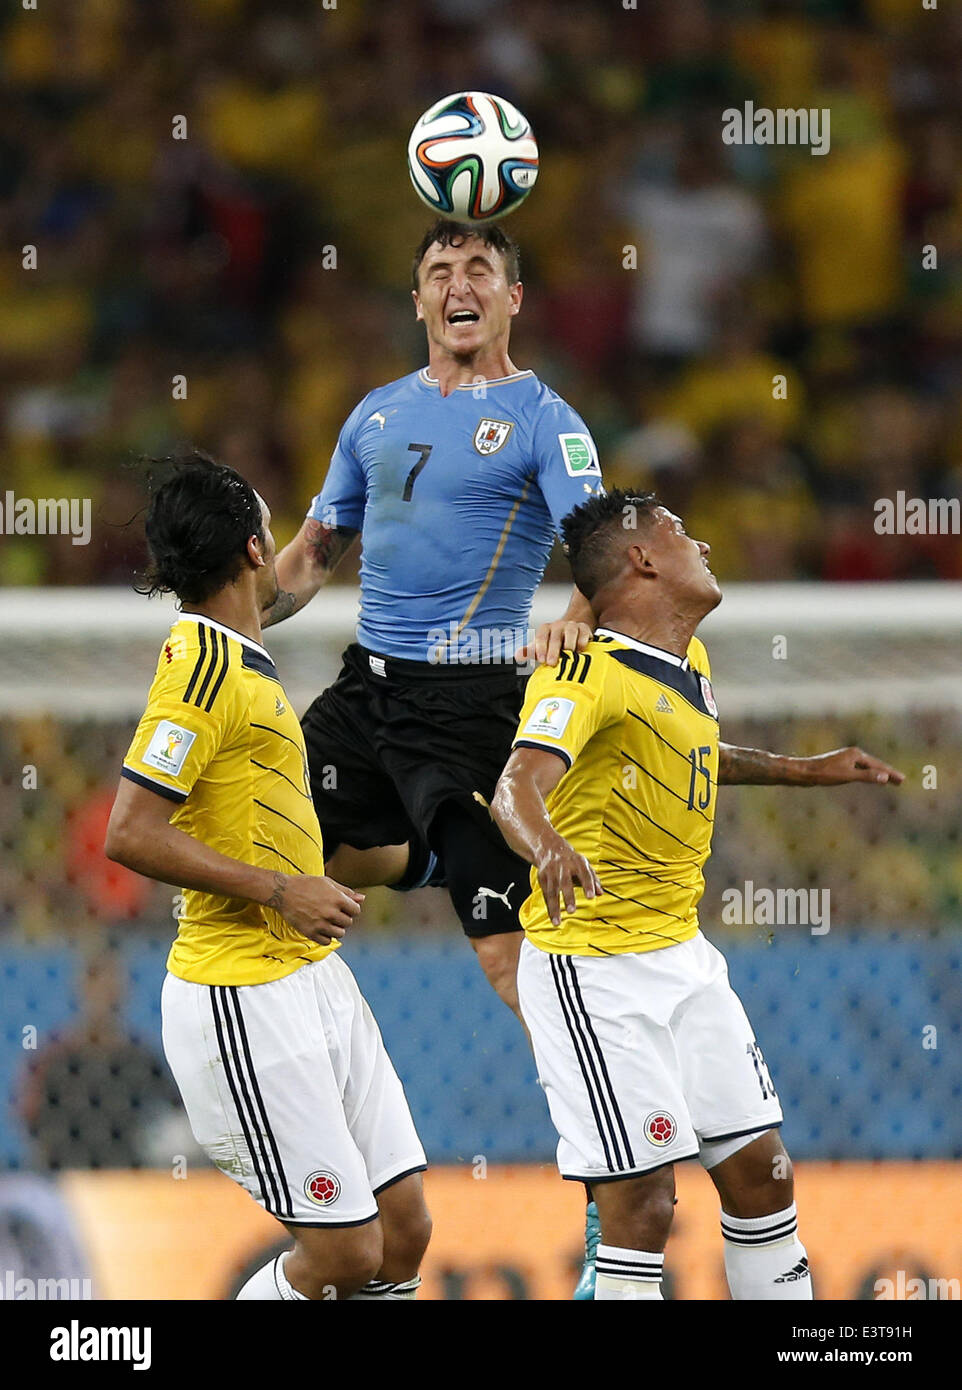 Rio De Janeiro, Brazil. 28th June, 2014. Uruguay's Cristian Rodriguez (C) heads the ball during a Round of 16 match between Colombia and Uruguay of 2014 FIFA World Cup at the Estadio do Maracana Stadium in Rio de Janeiro, Brazil, on June 28, 2014. Colombia won 2-0 over Uruguay and qualified for Quarter-finals on Saturday. Credit:  Wang Lili/Xinhua/Alamy Live News Stock Photo